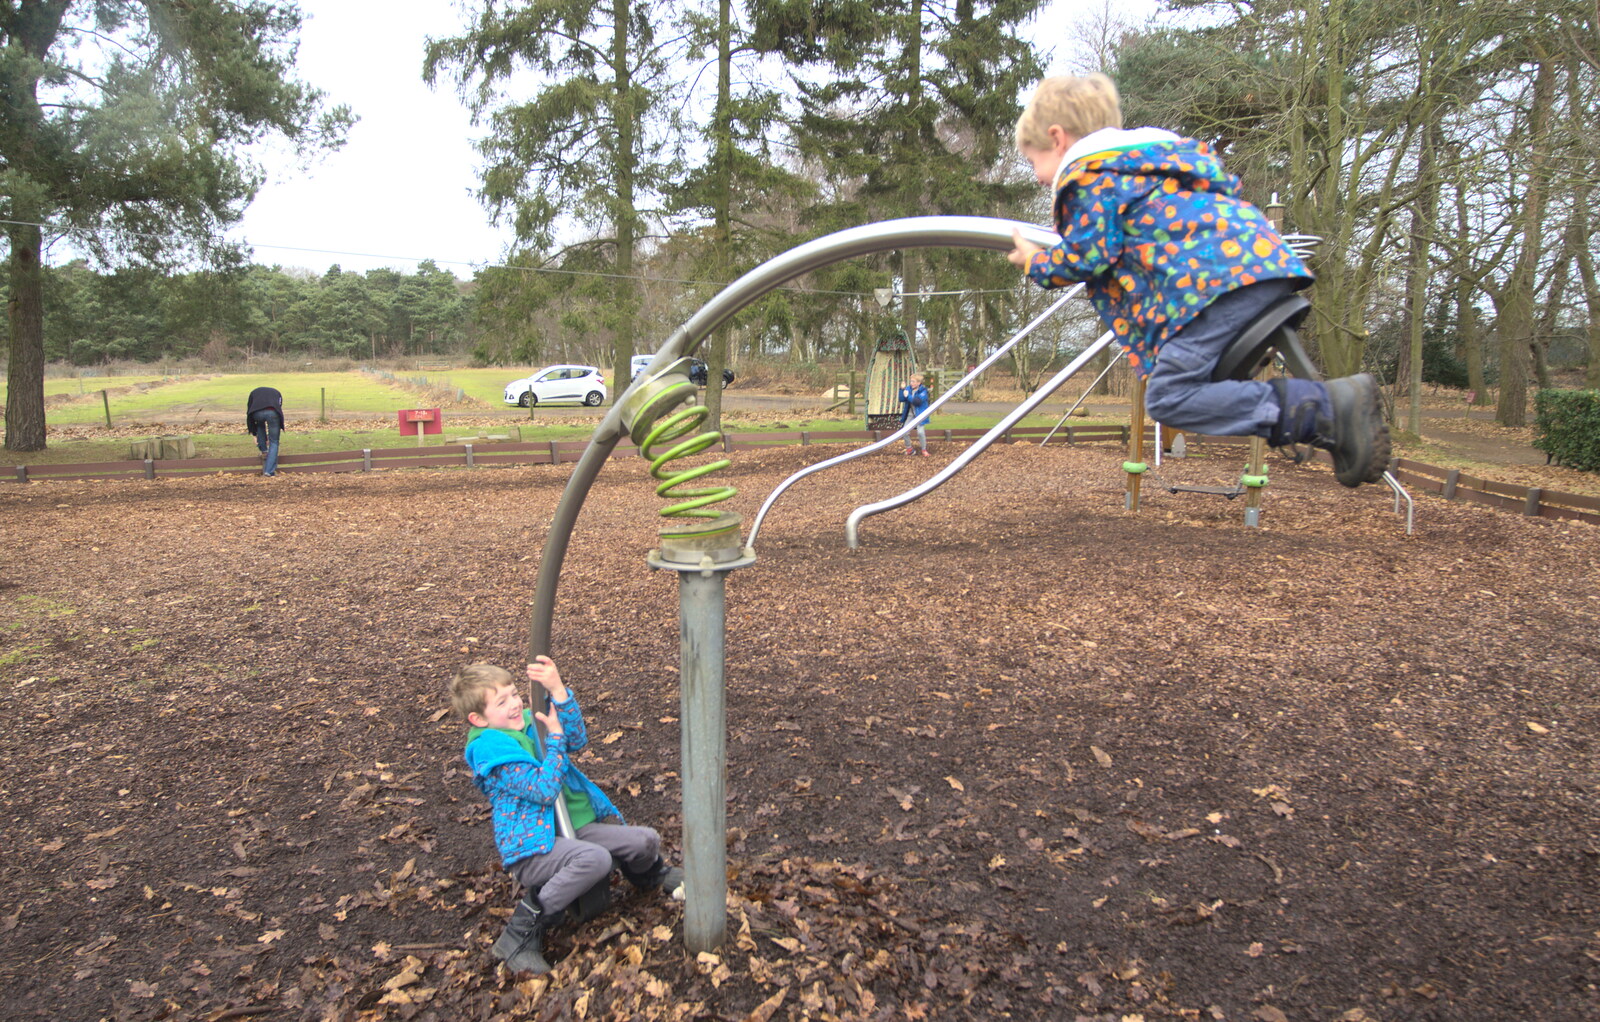 Fred and Harry do some extreme bouncing from A Trip to Sutton Hoo, Woodbridge, Suffolk - 29th January 2017